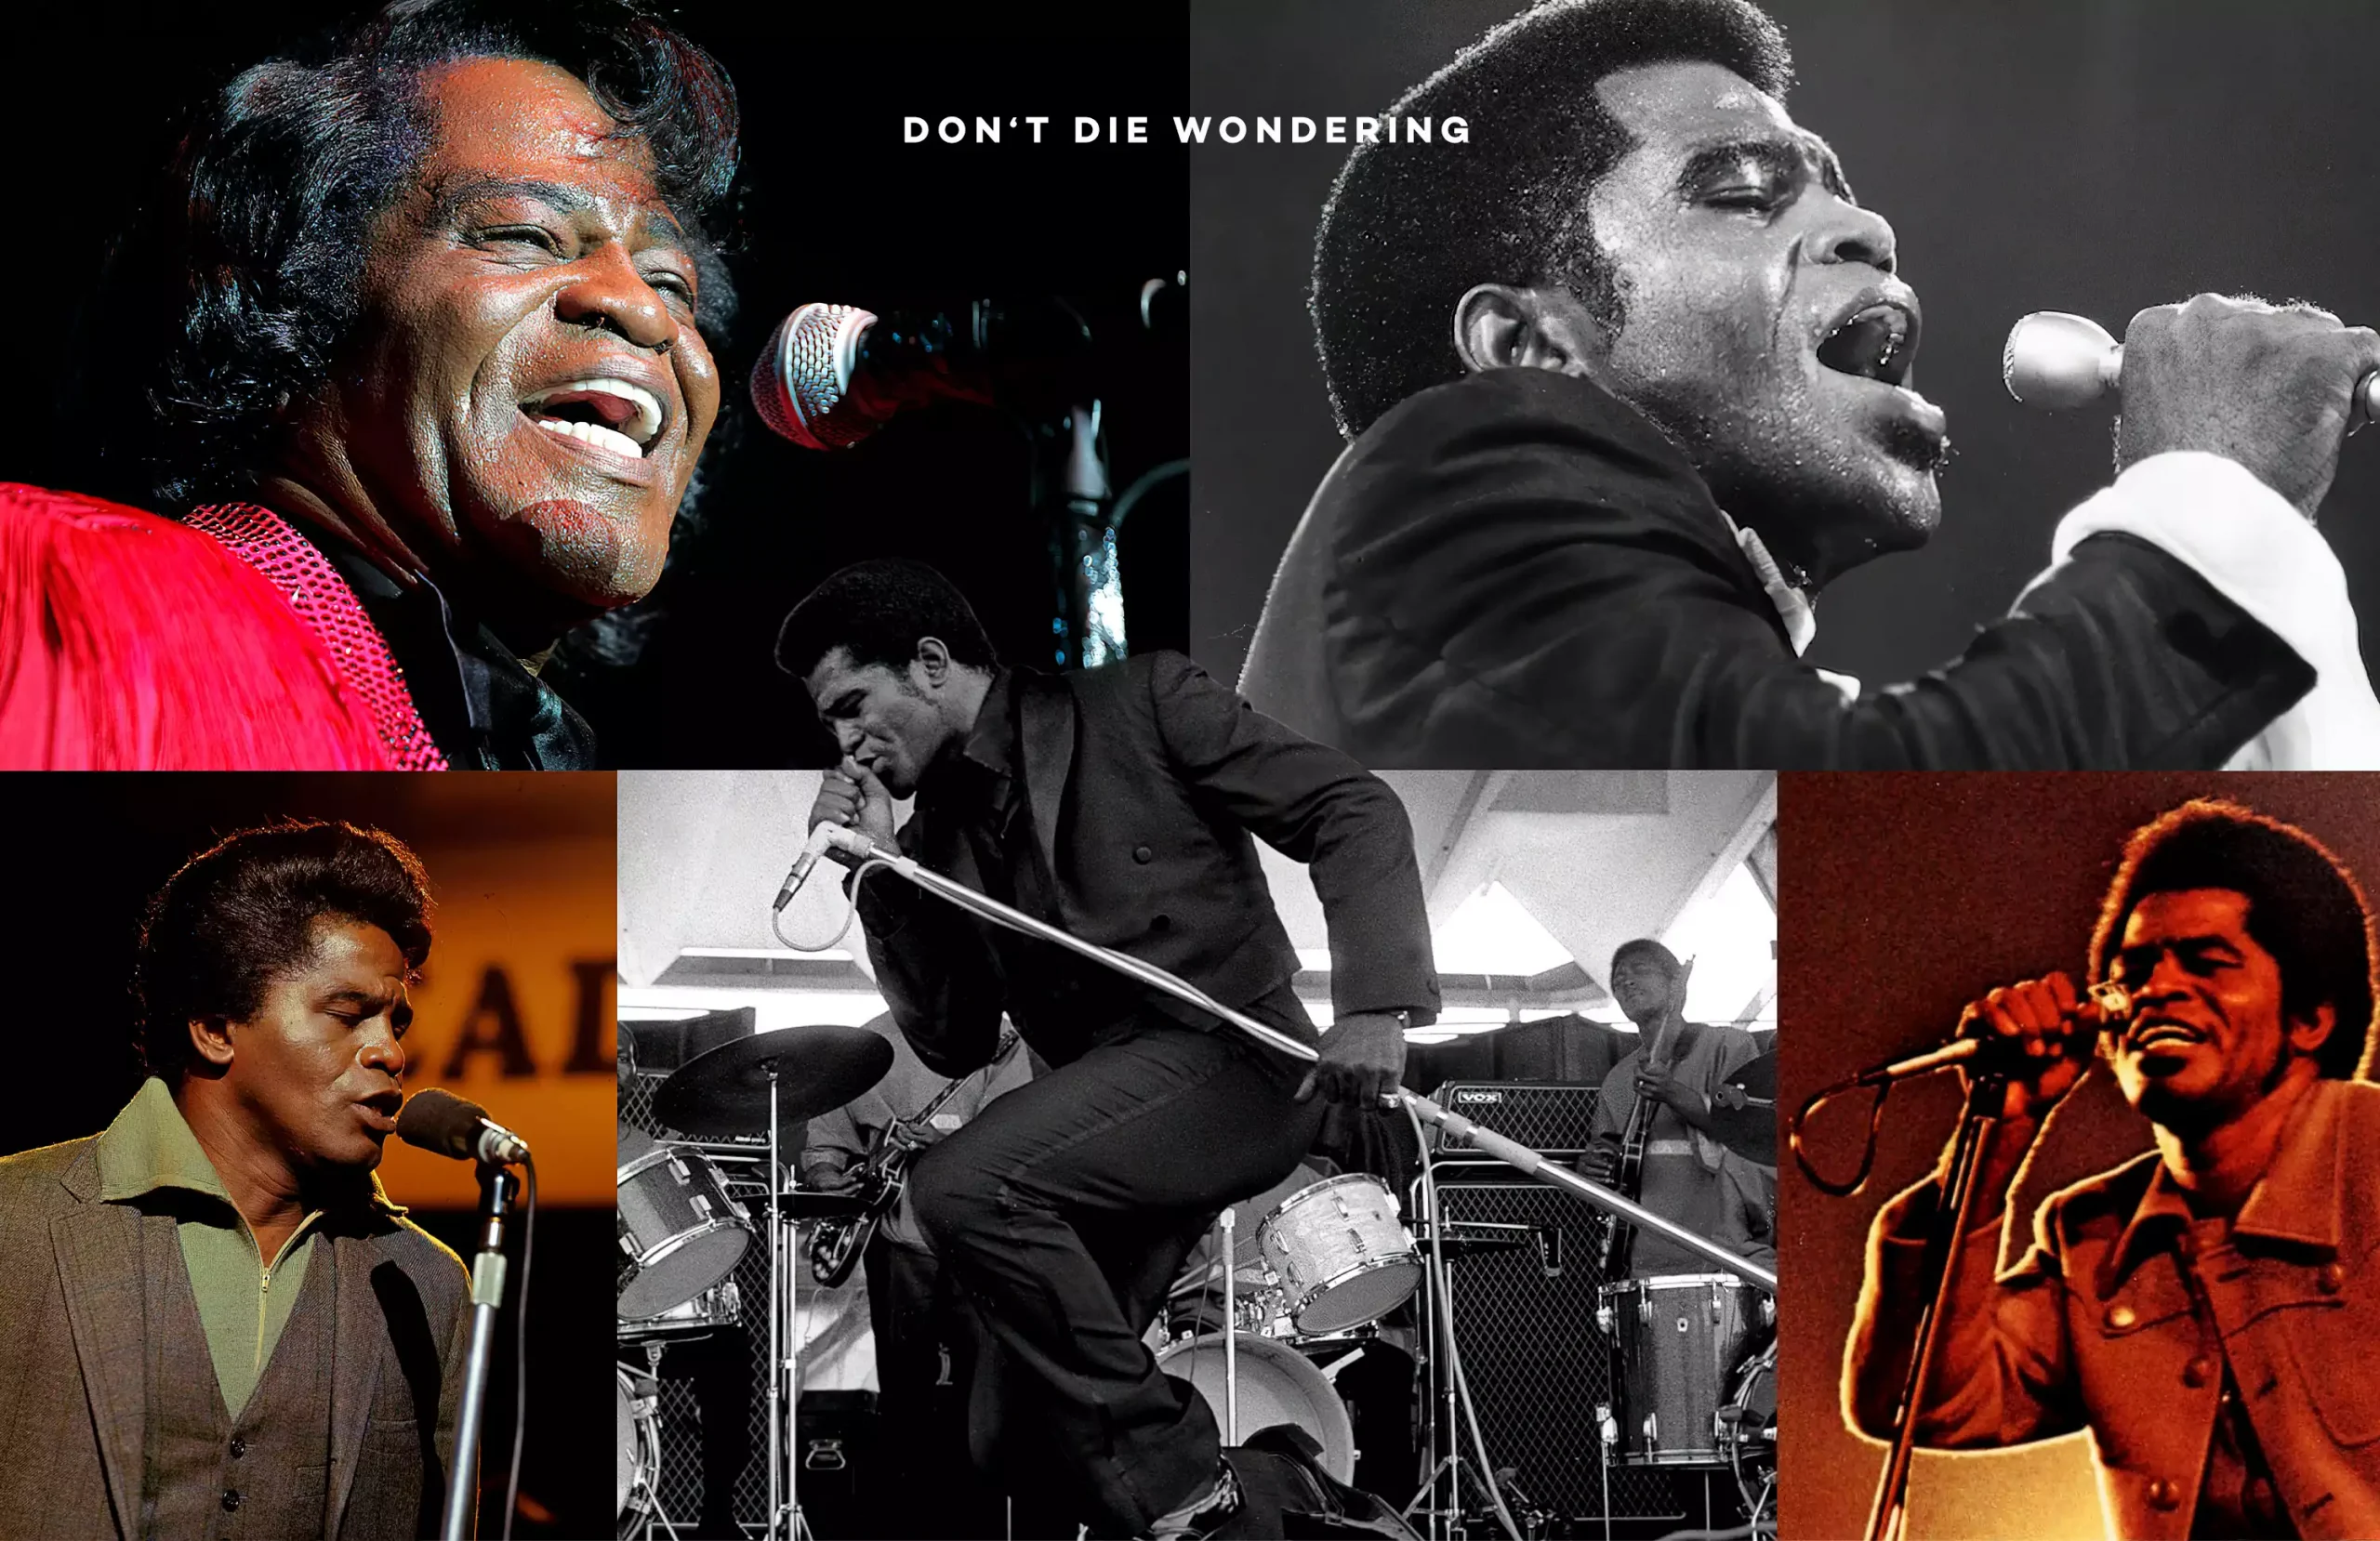 What To Expect From The New James Brown Documentary Series DDW